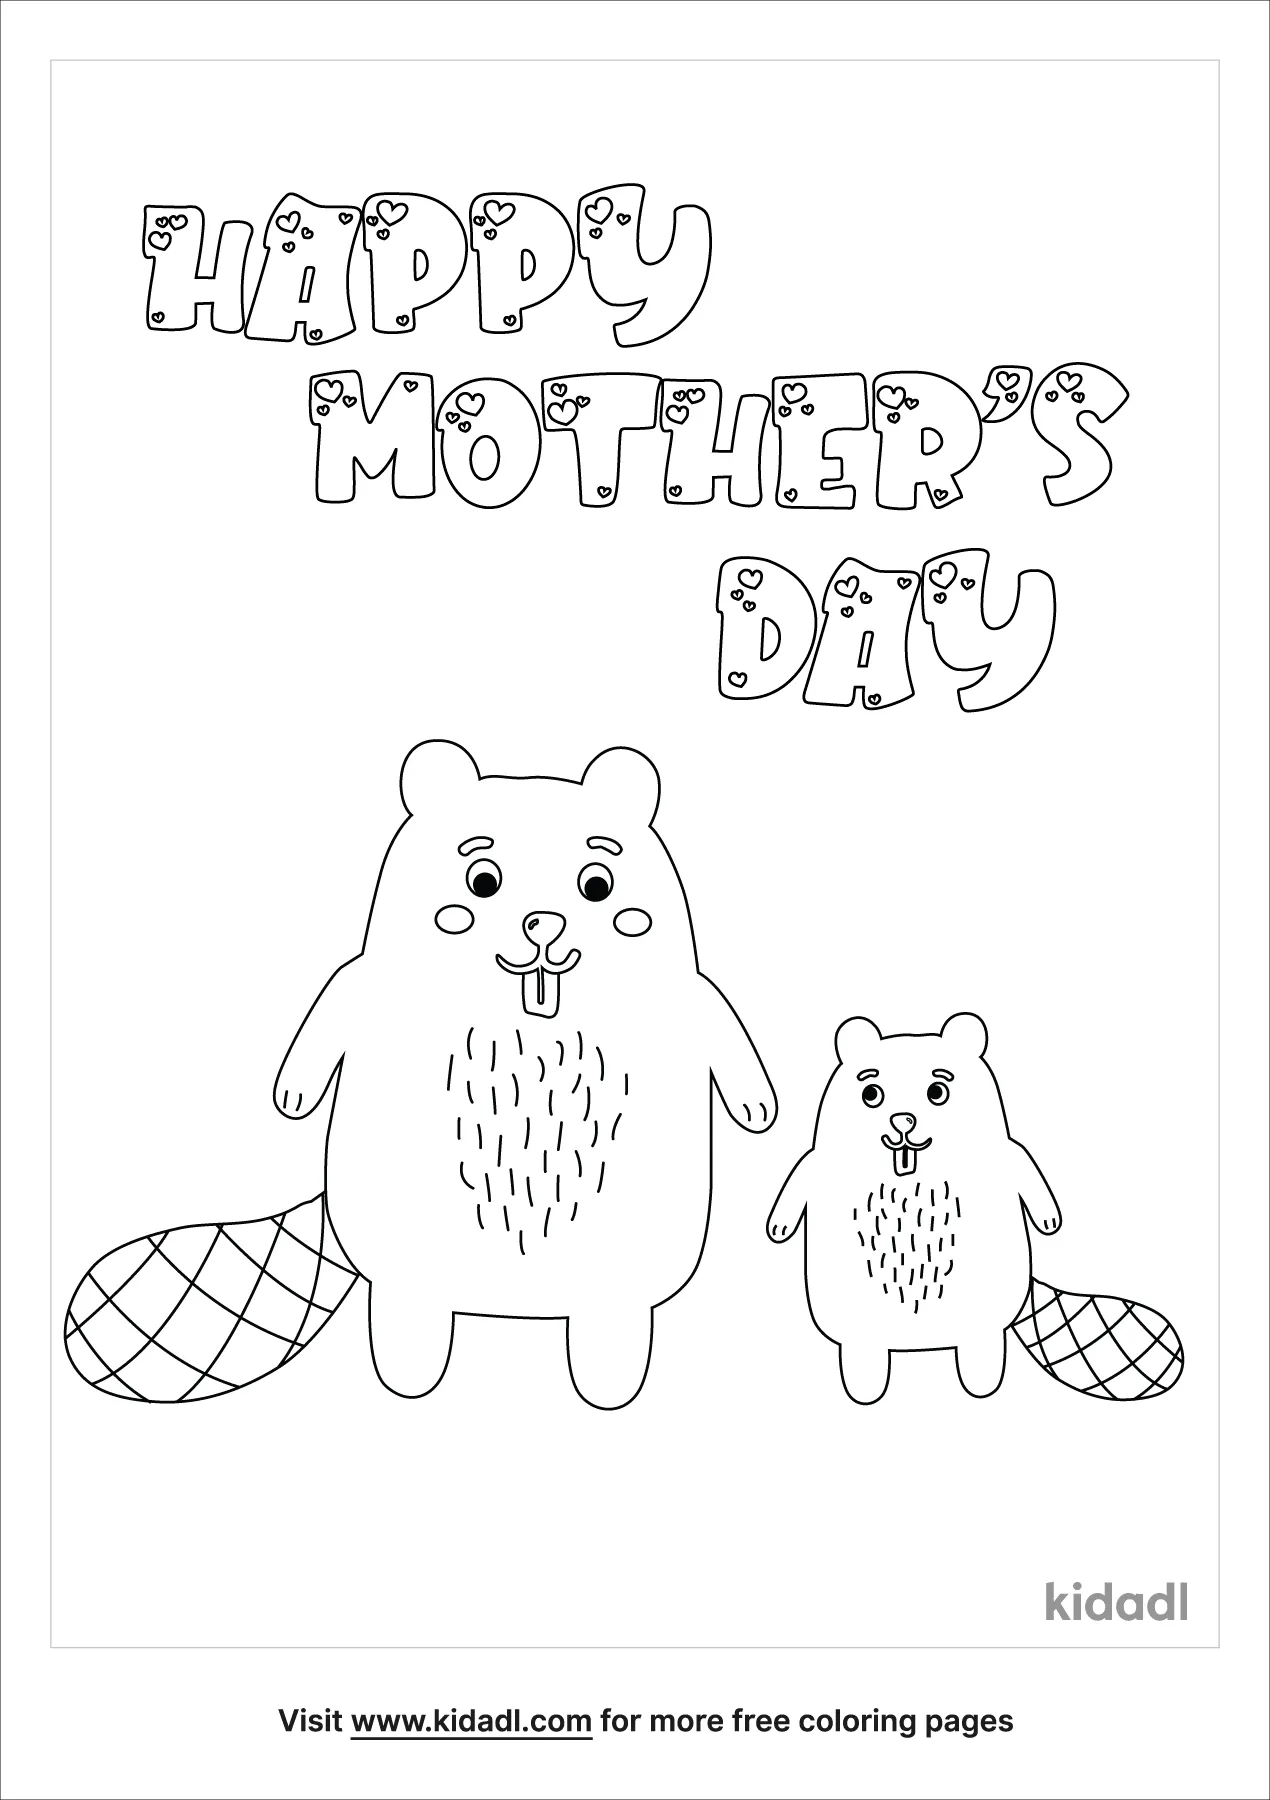 Free Mothers Day Beaver Coloring Page | Coloring Page Printables | Kidadl